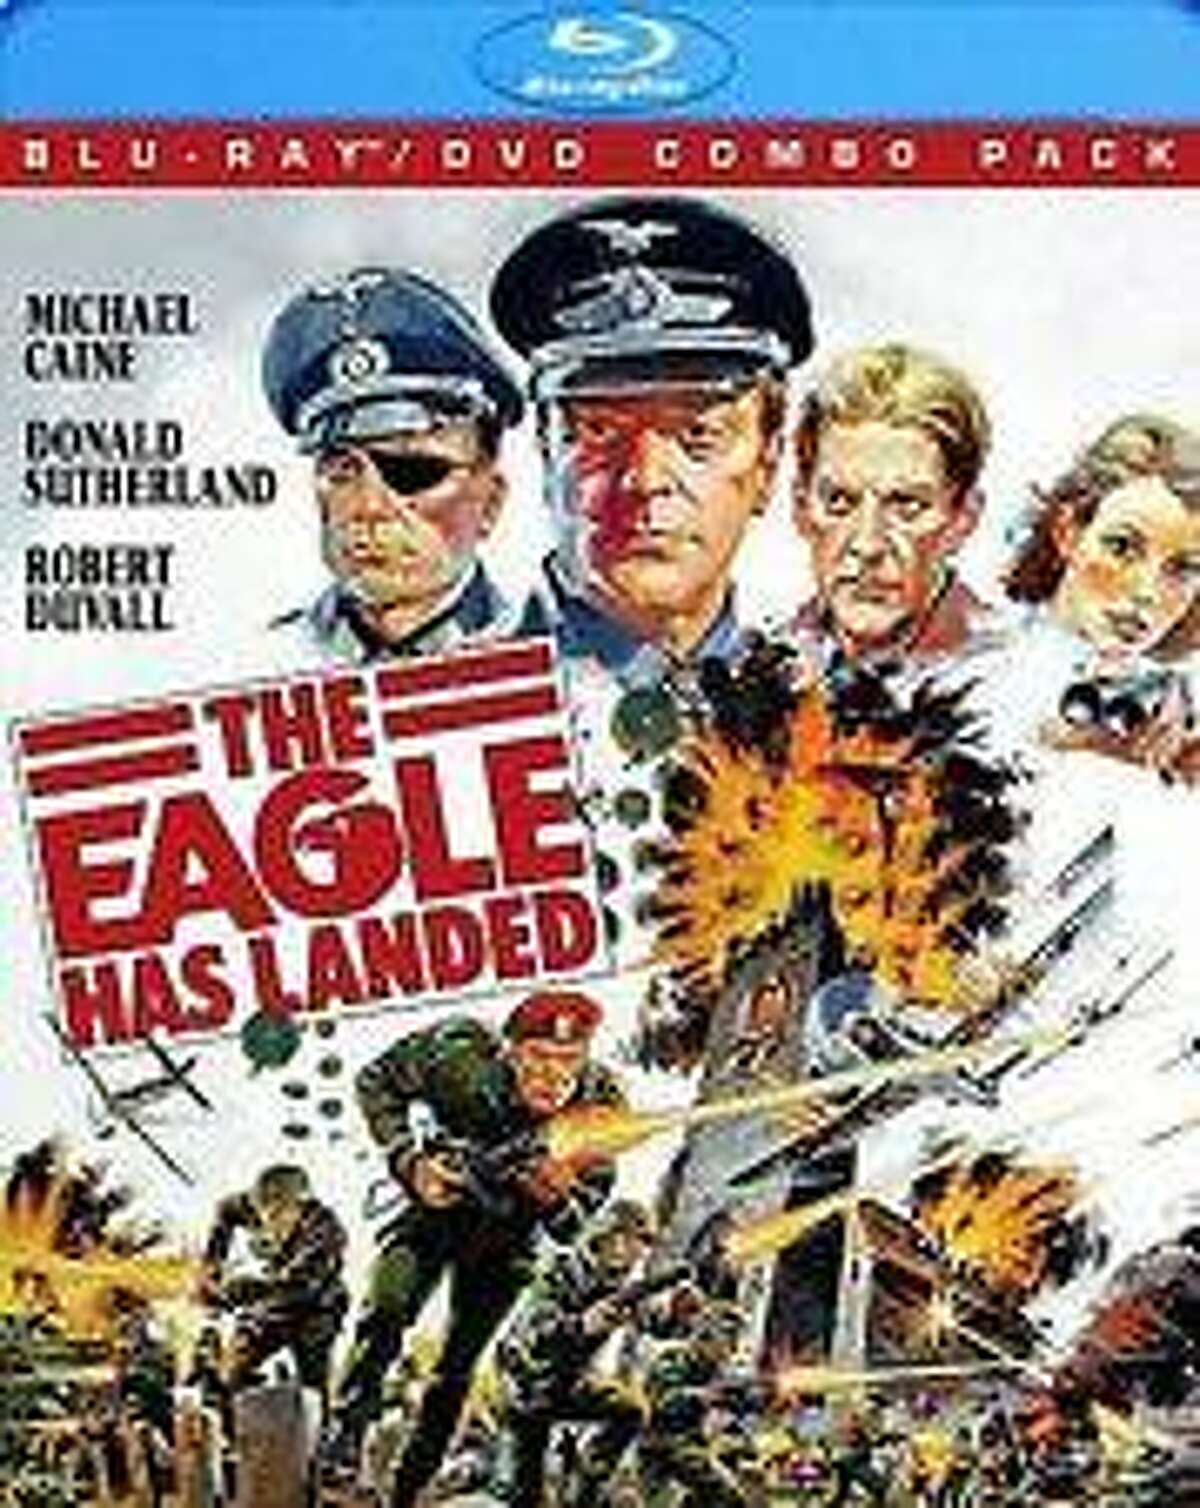 The cover of the move, "The Eagle Has Landed: Collector's Edition" on DVD.